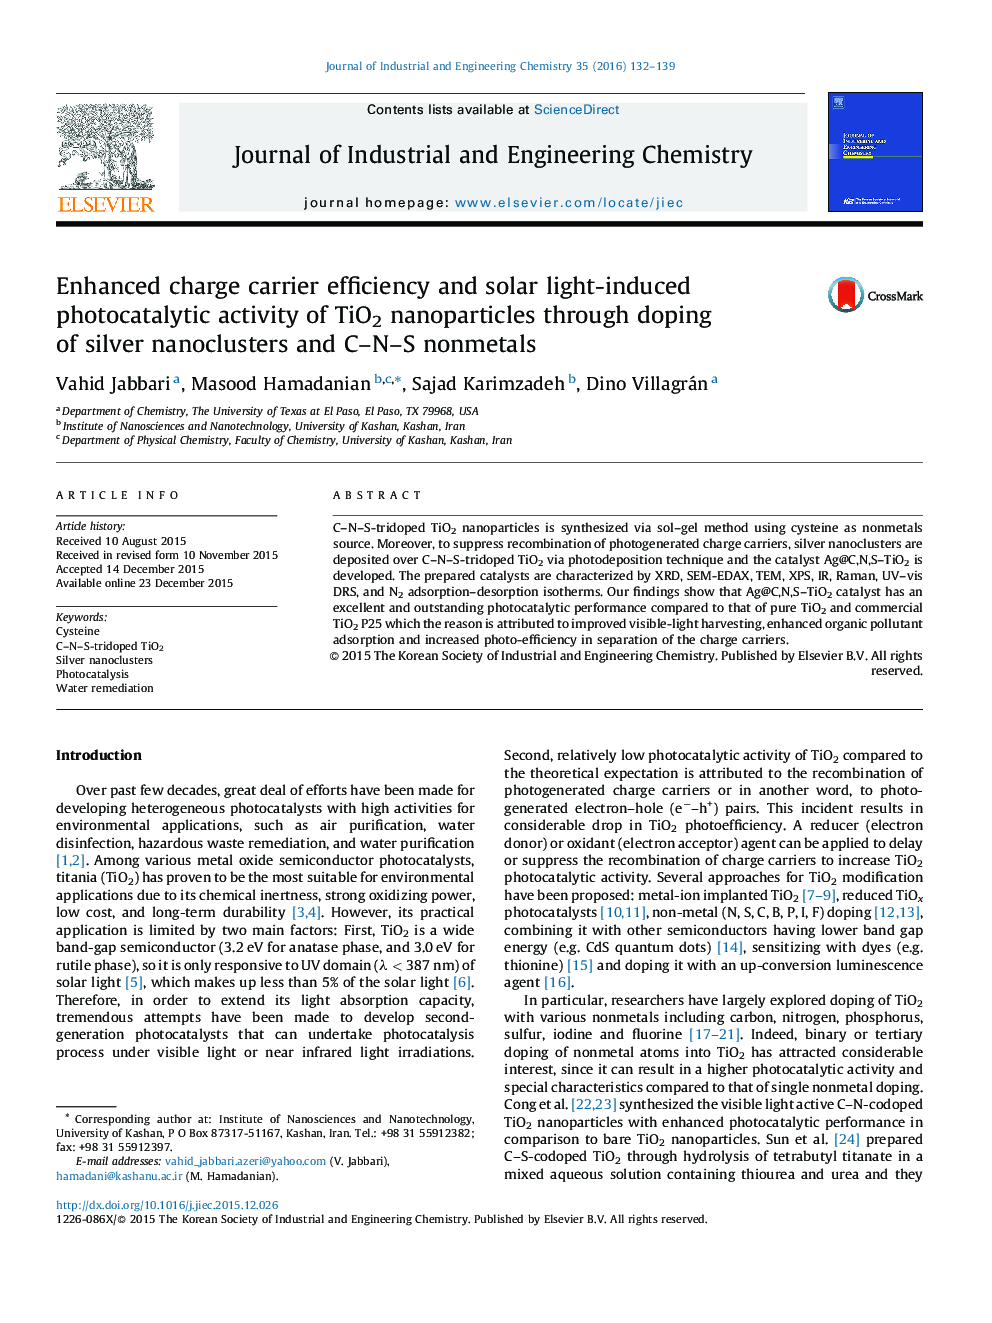 Enhanced charge carrier efficiency and solar light-induced photocatalytic activity of TiO2 nanoparticles through doping of silver nanoclusters and C–N–S nonmetals